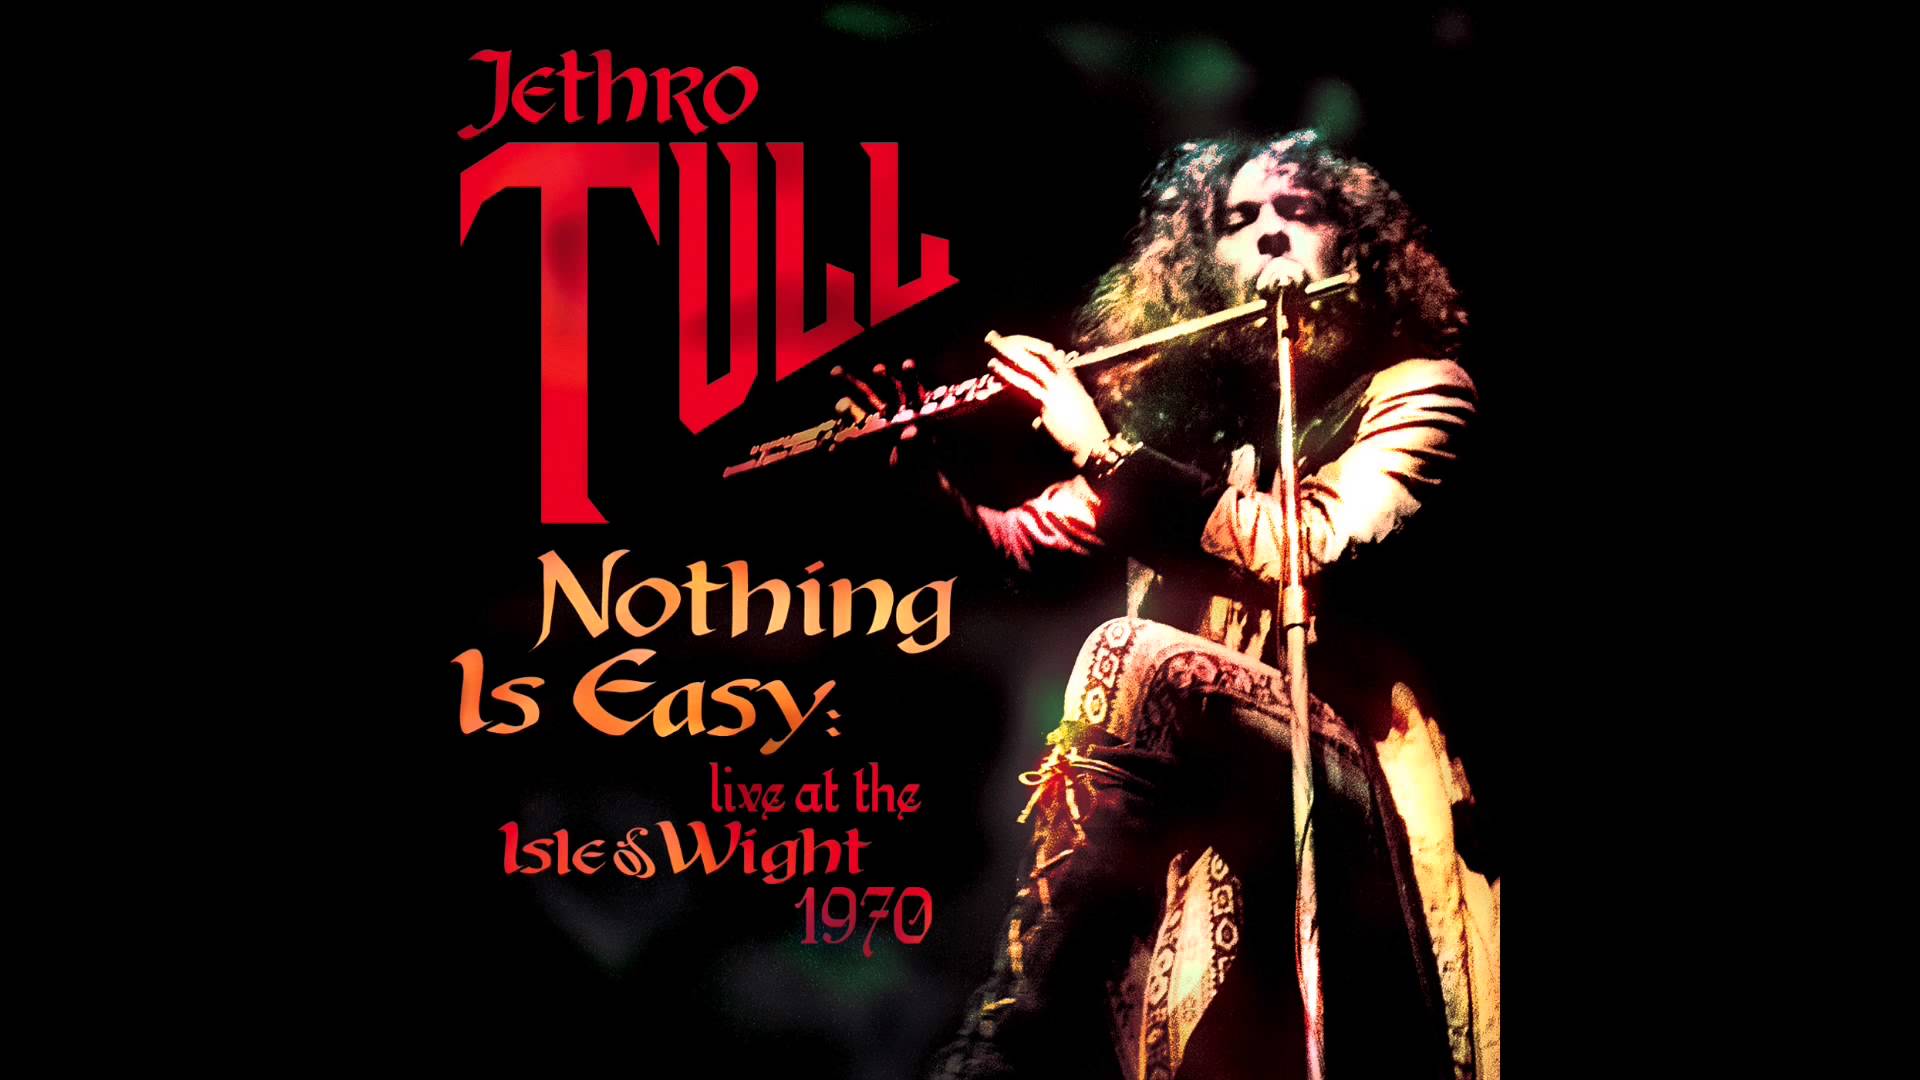 Jethro Tull God (Live at the Isle of Wight 1970) Audio